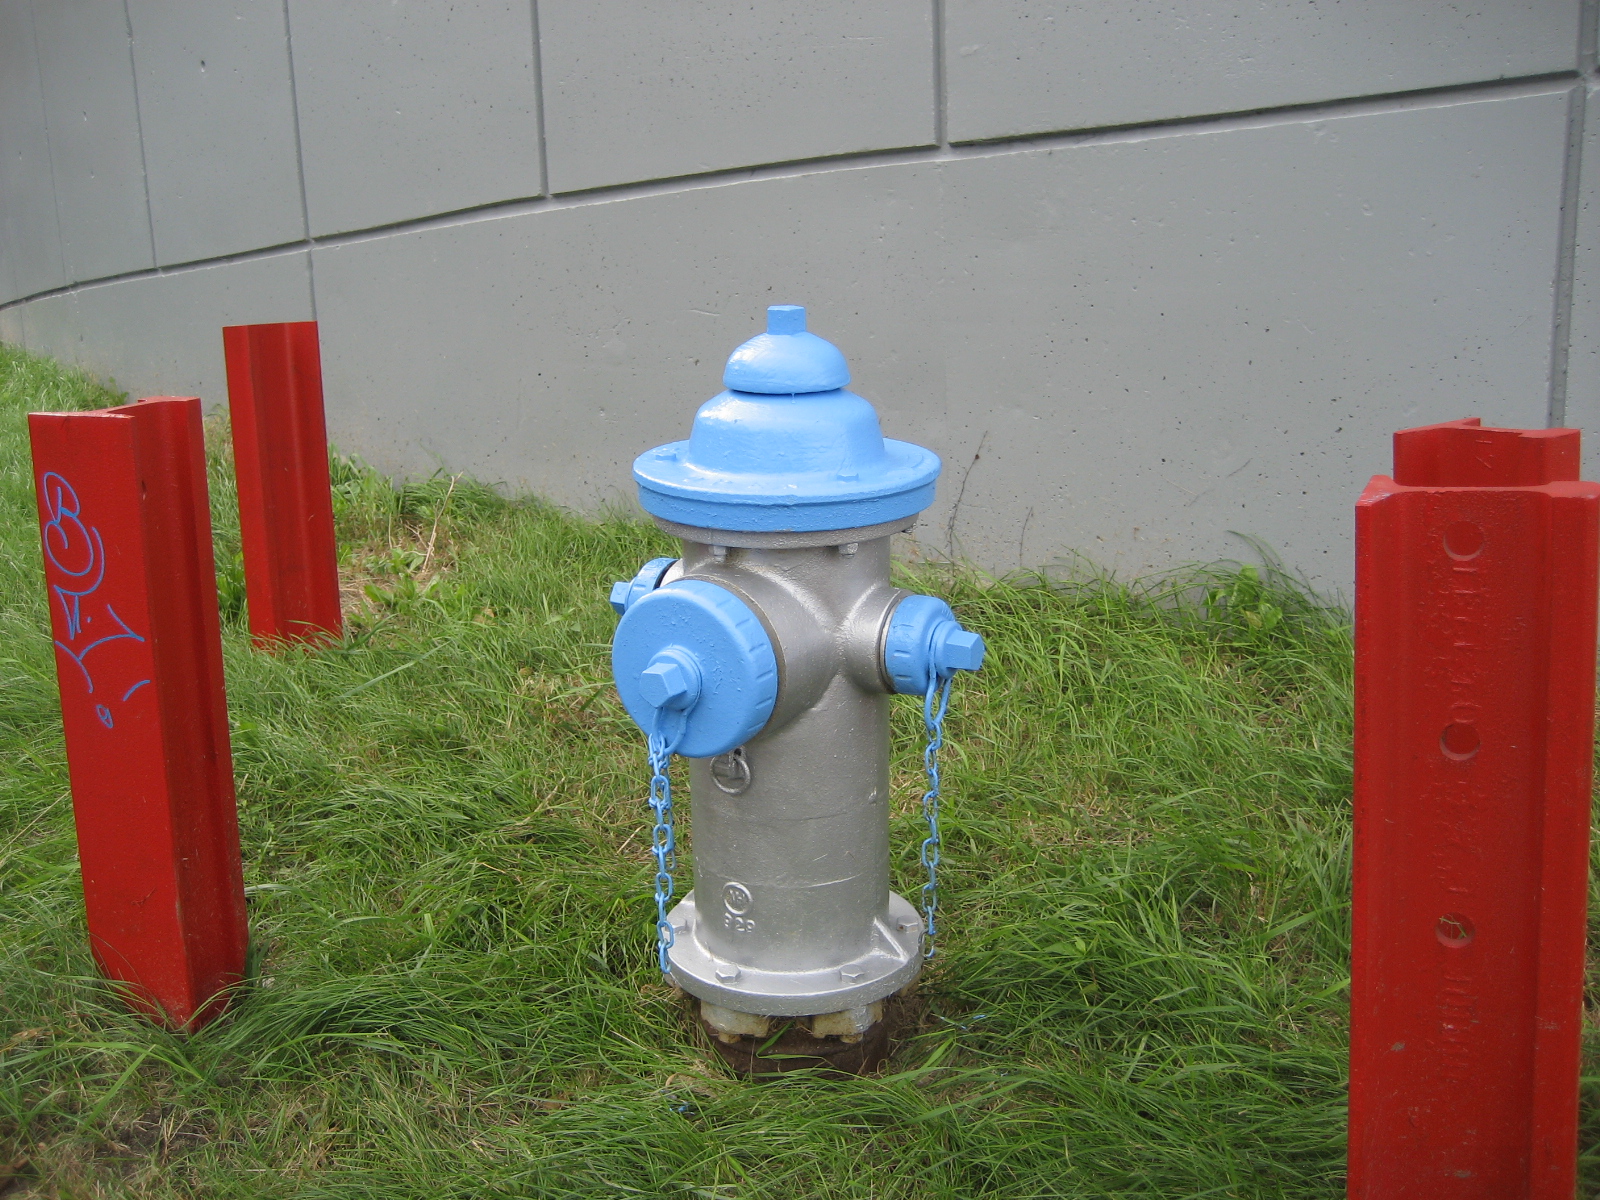 a fire hydrant is shown behind three red posts